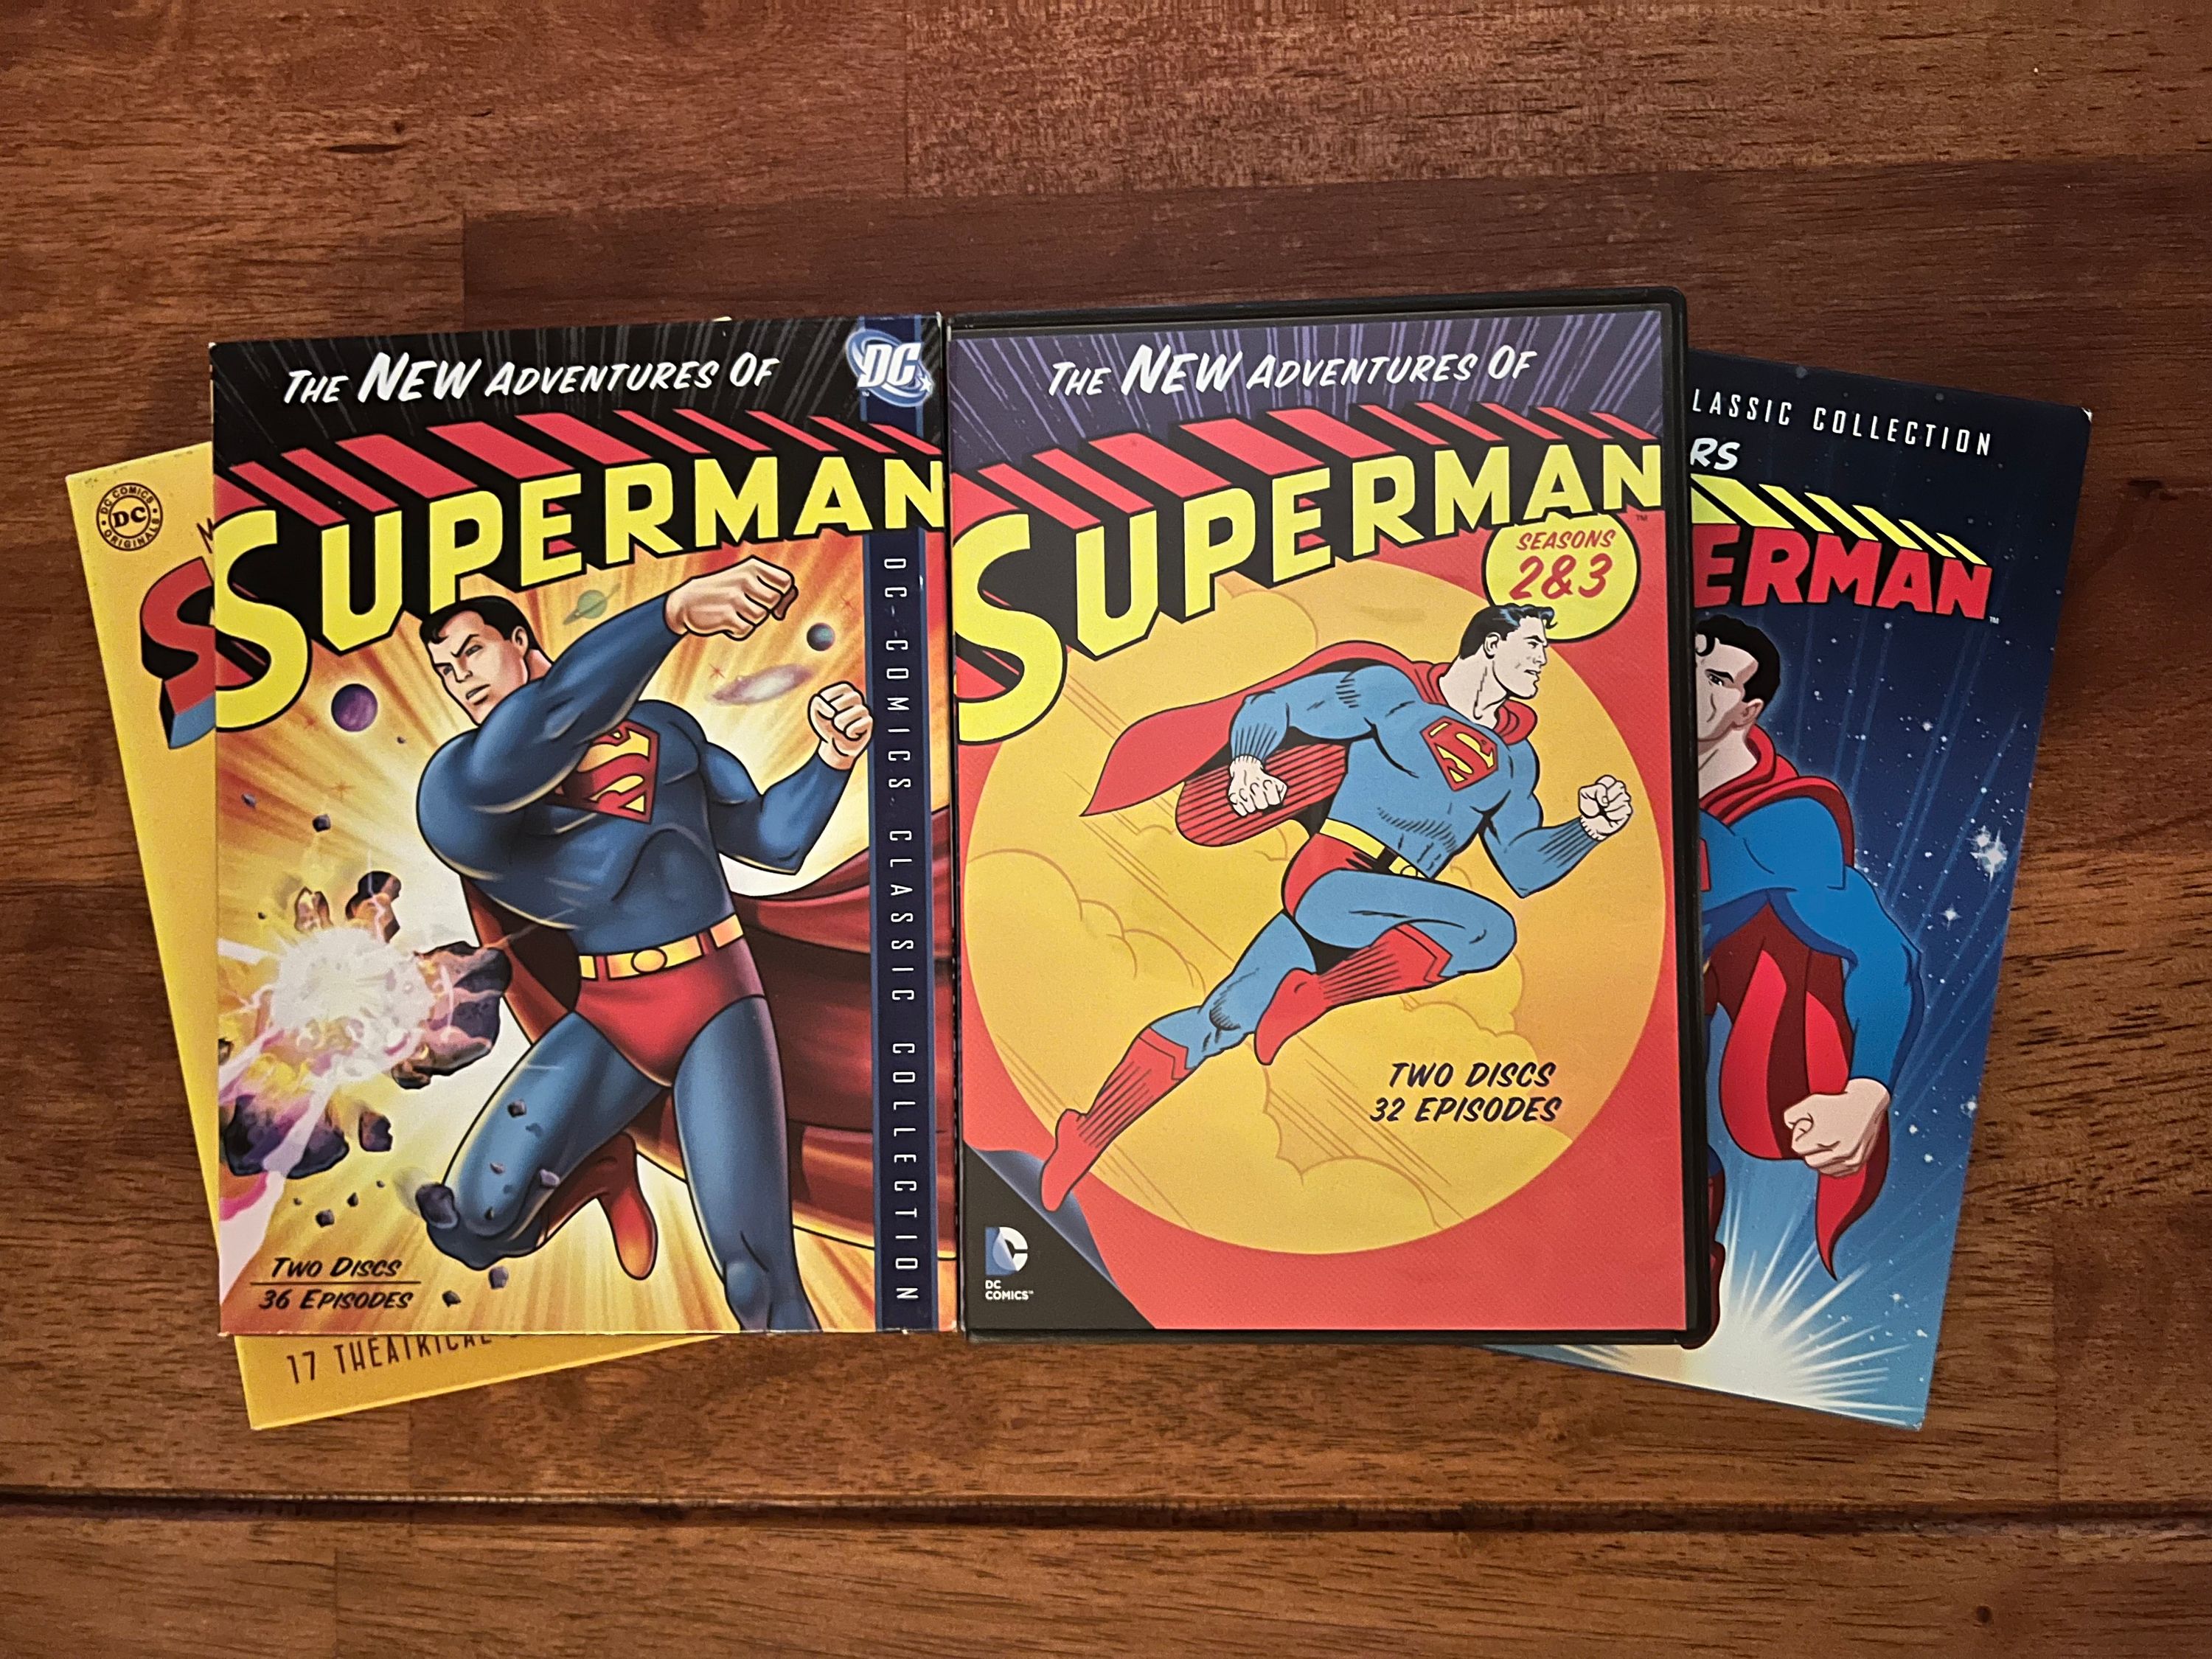 DVD sets for The New Adventures of Superman